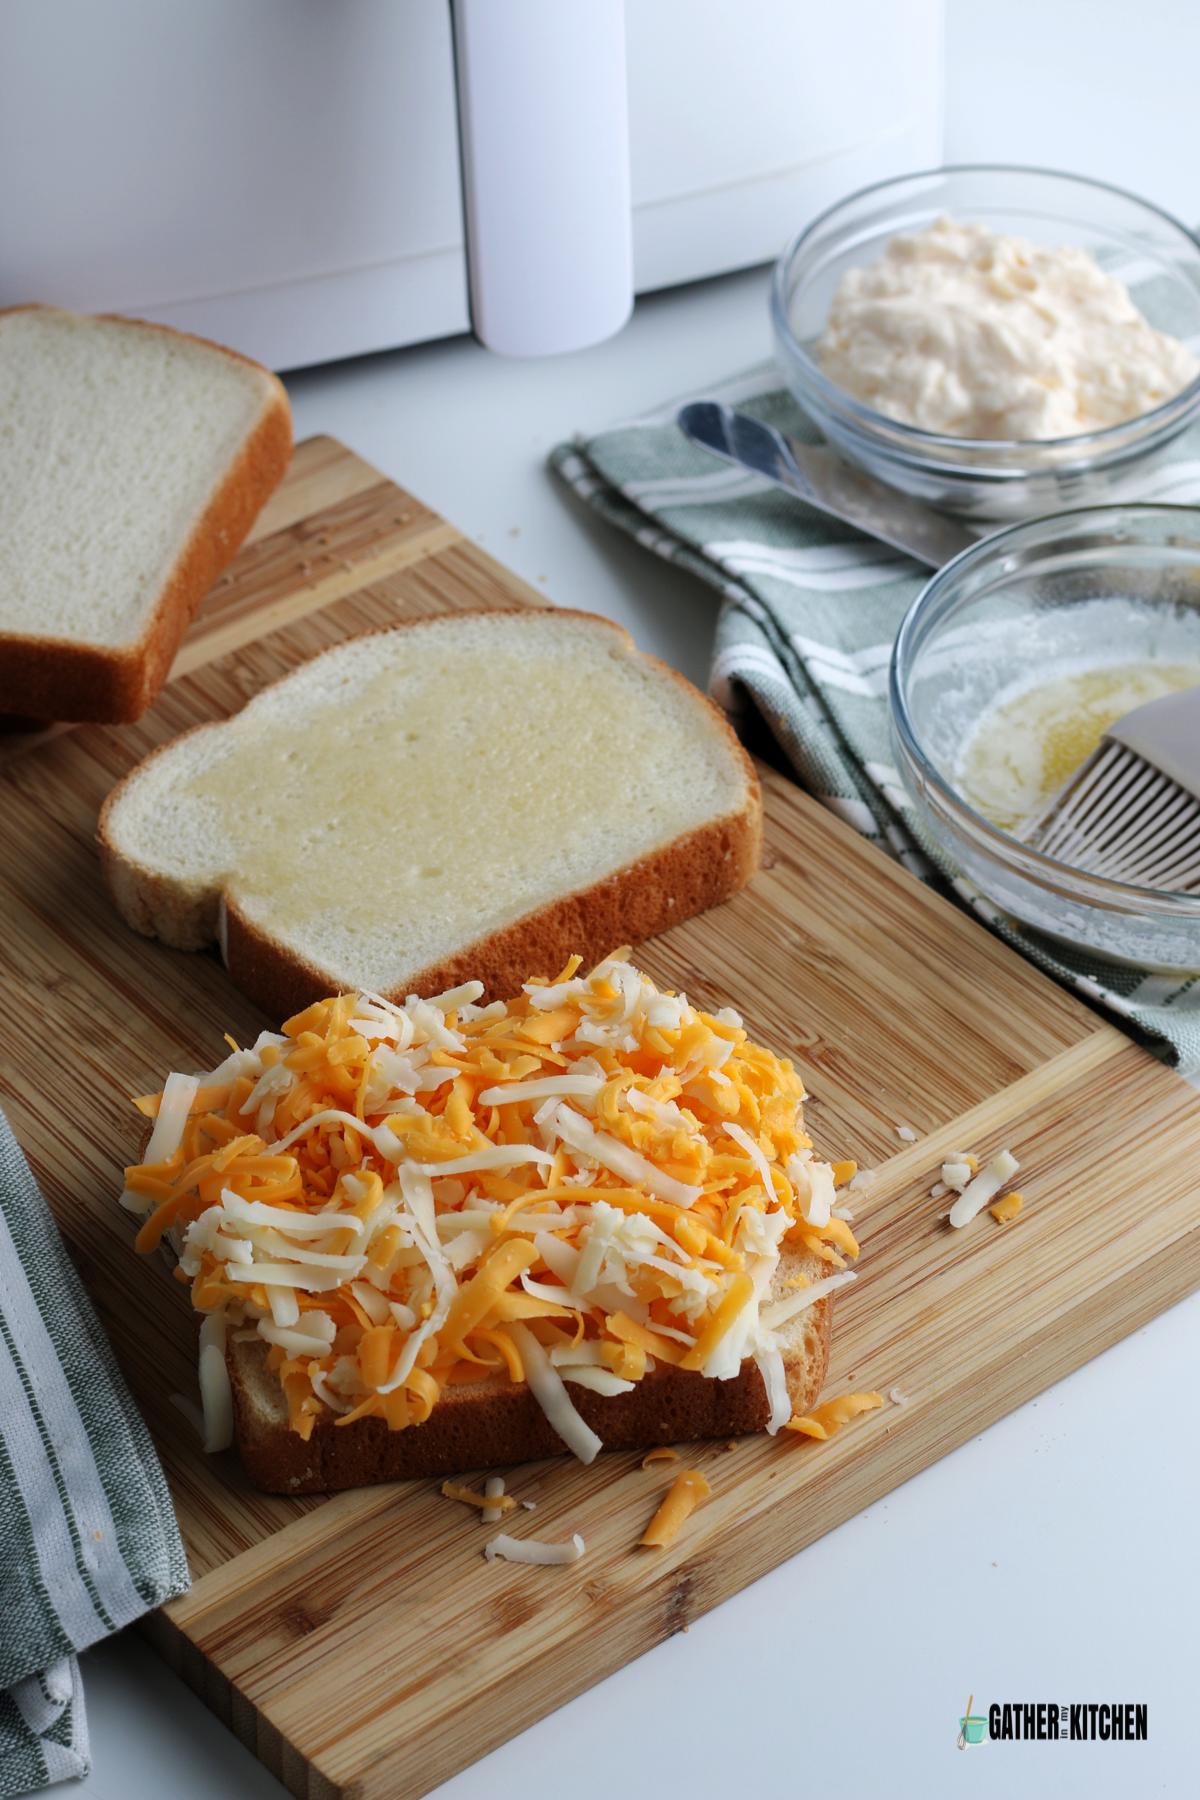 Grated cheese piled high on one slice of bread.